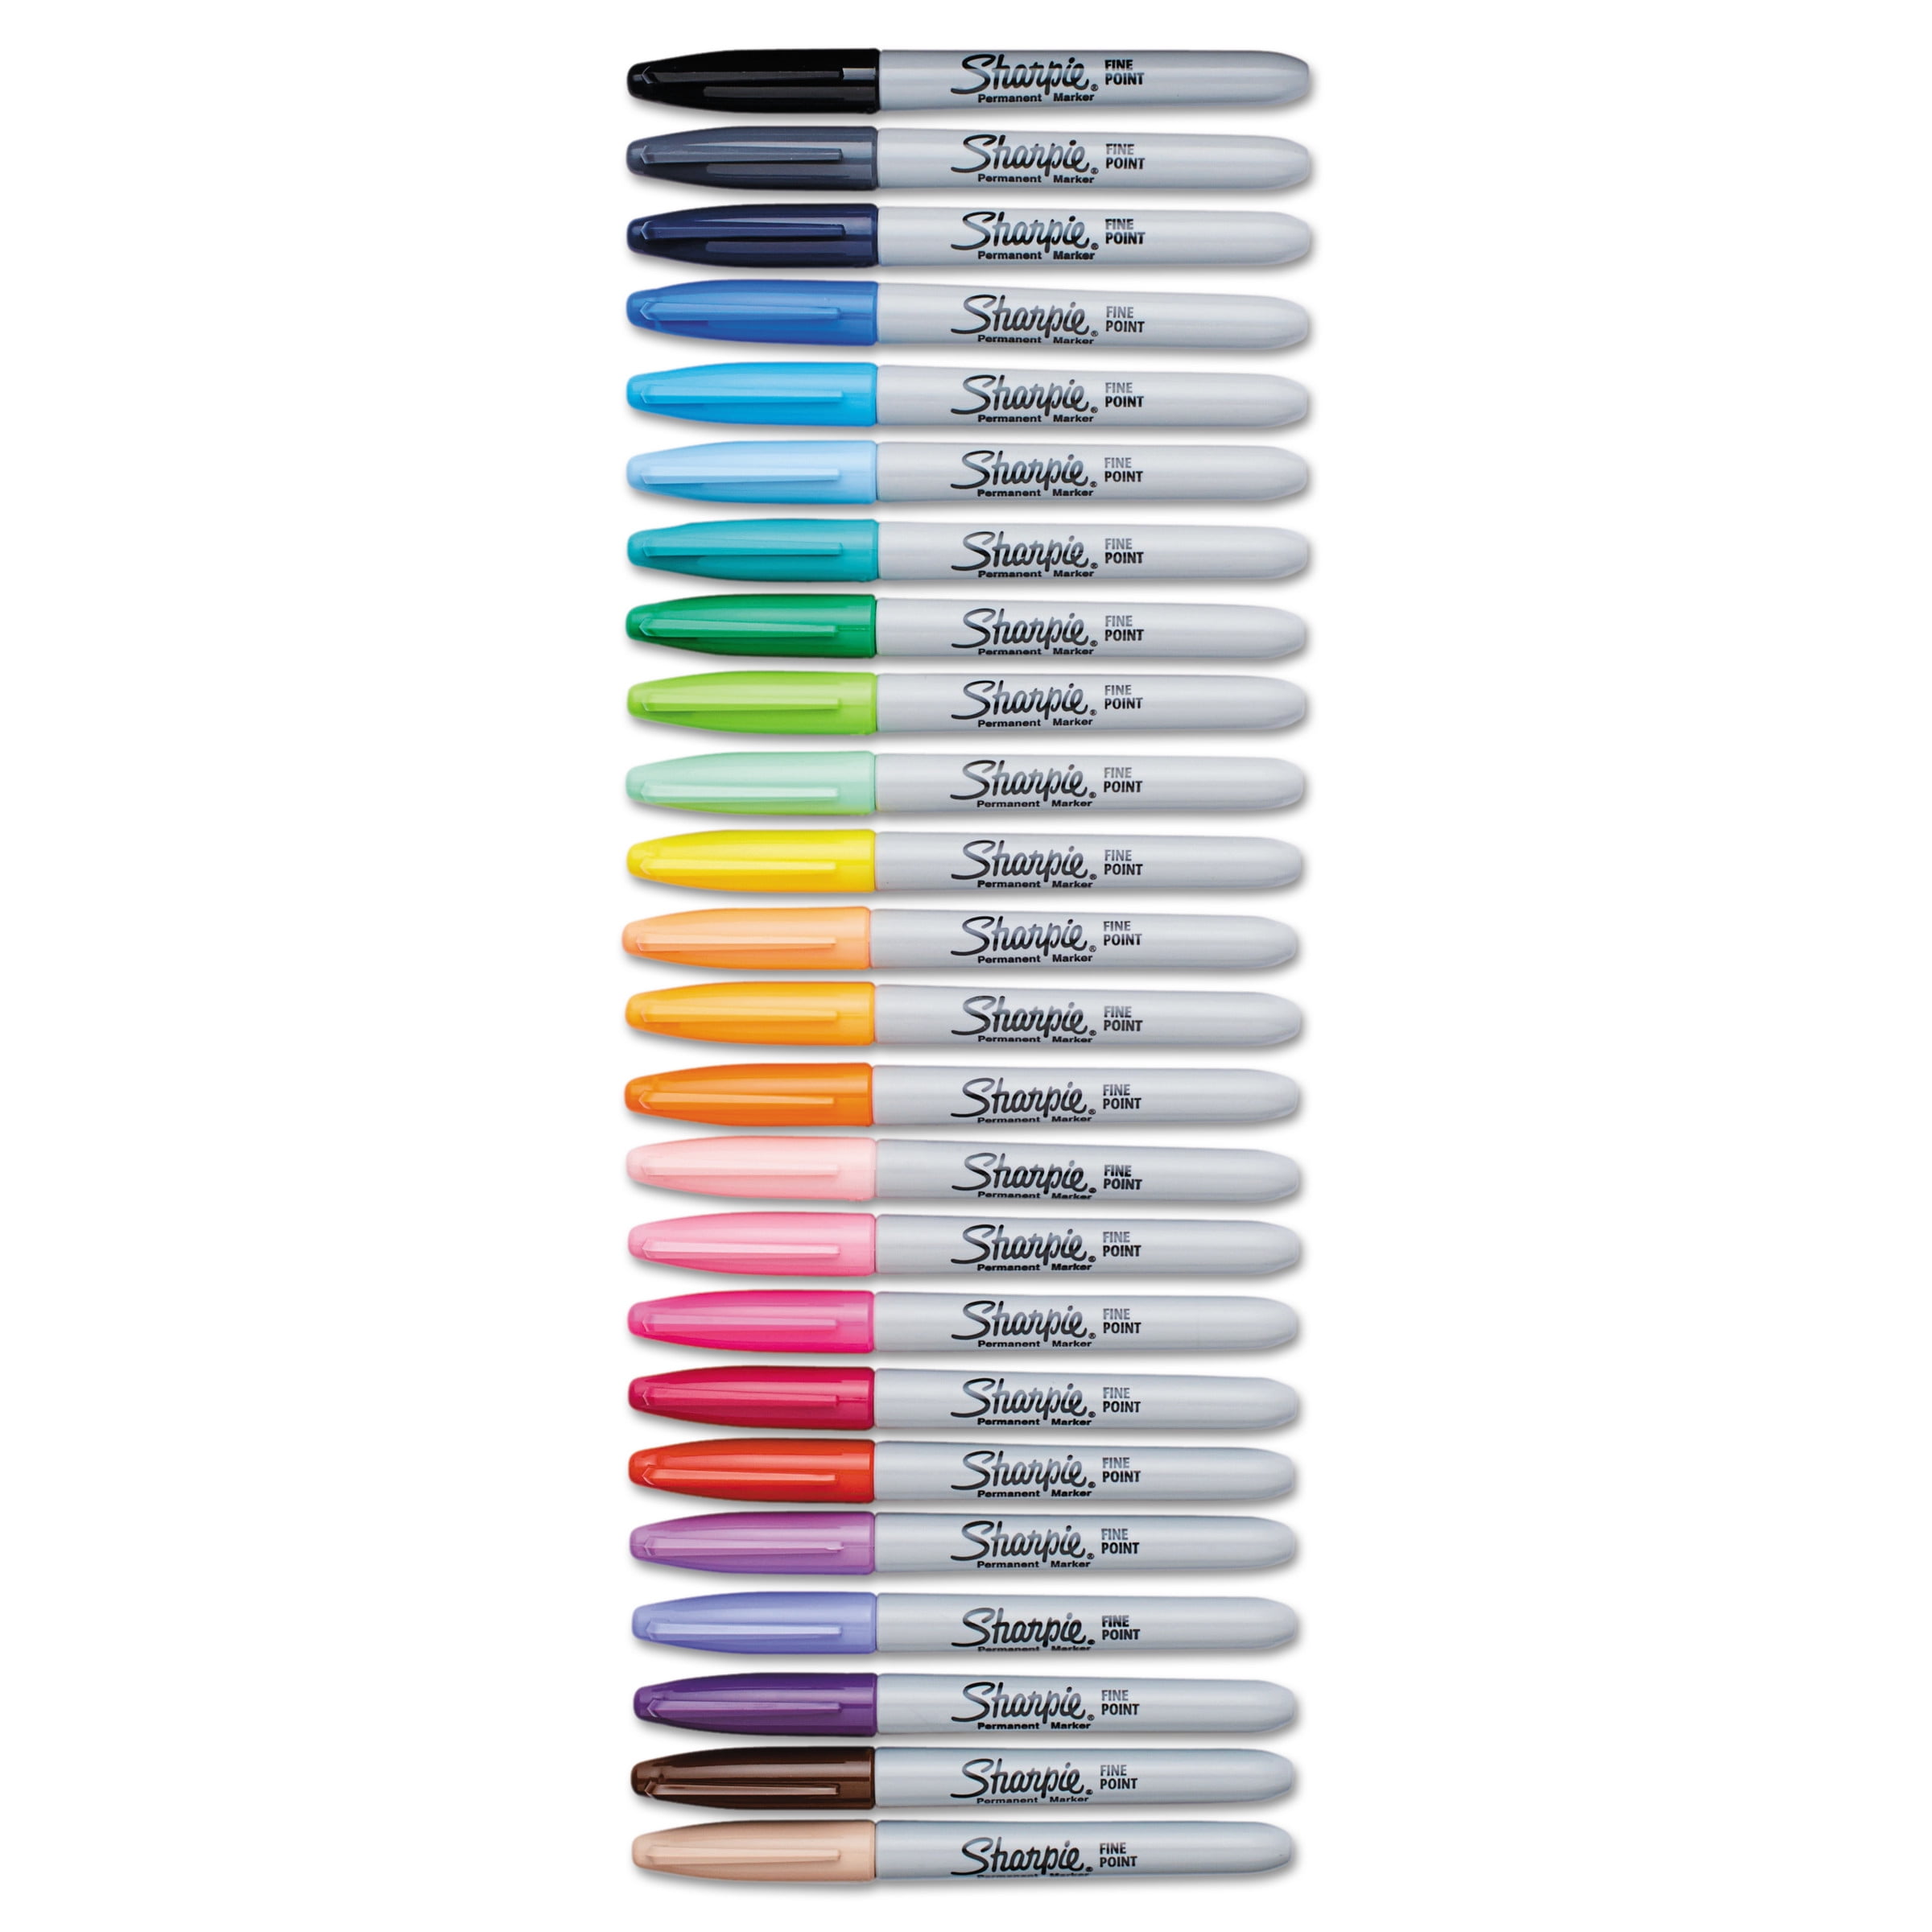 2 Packs of Sharpie Assorted Colored, Fine Point Permanent Markers,  12-Count, Total of 24 Markers